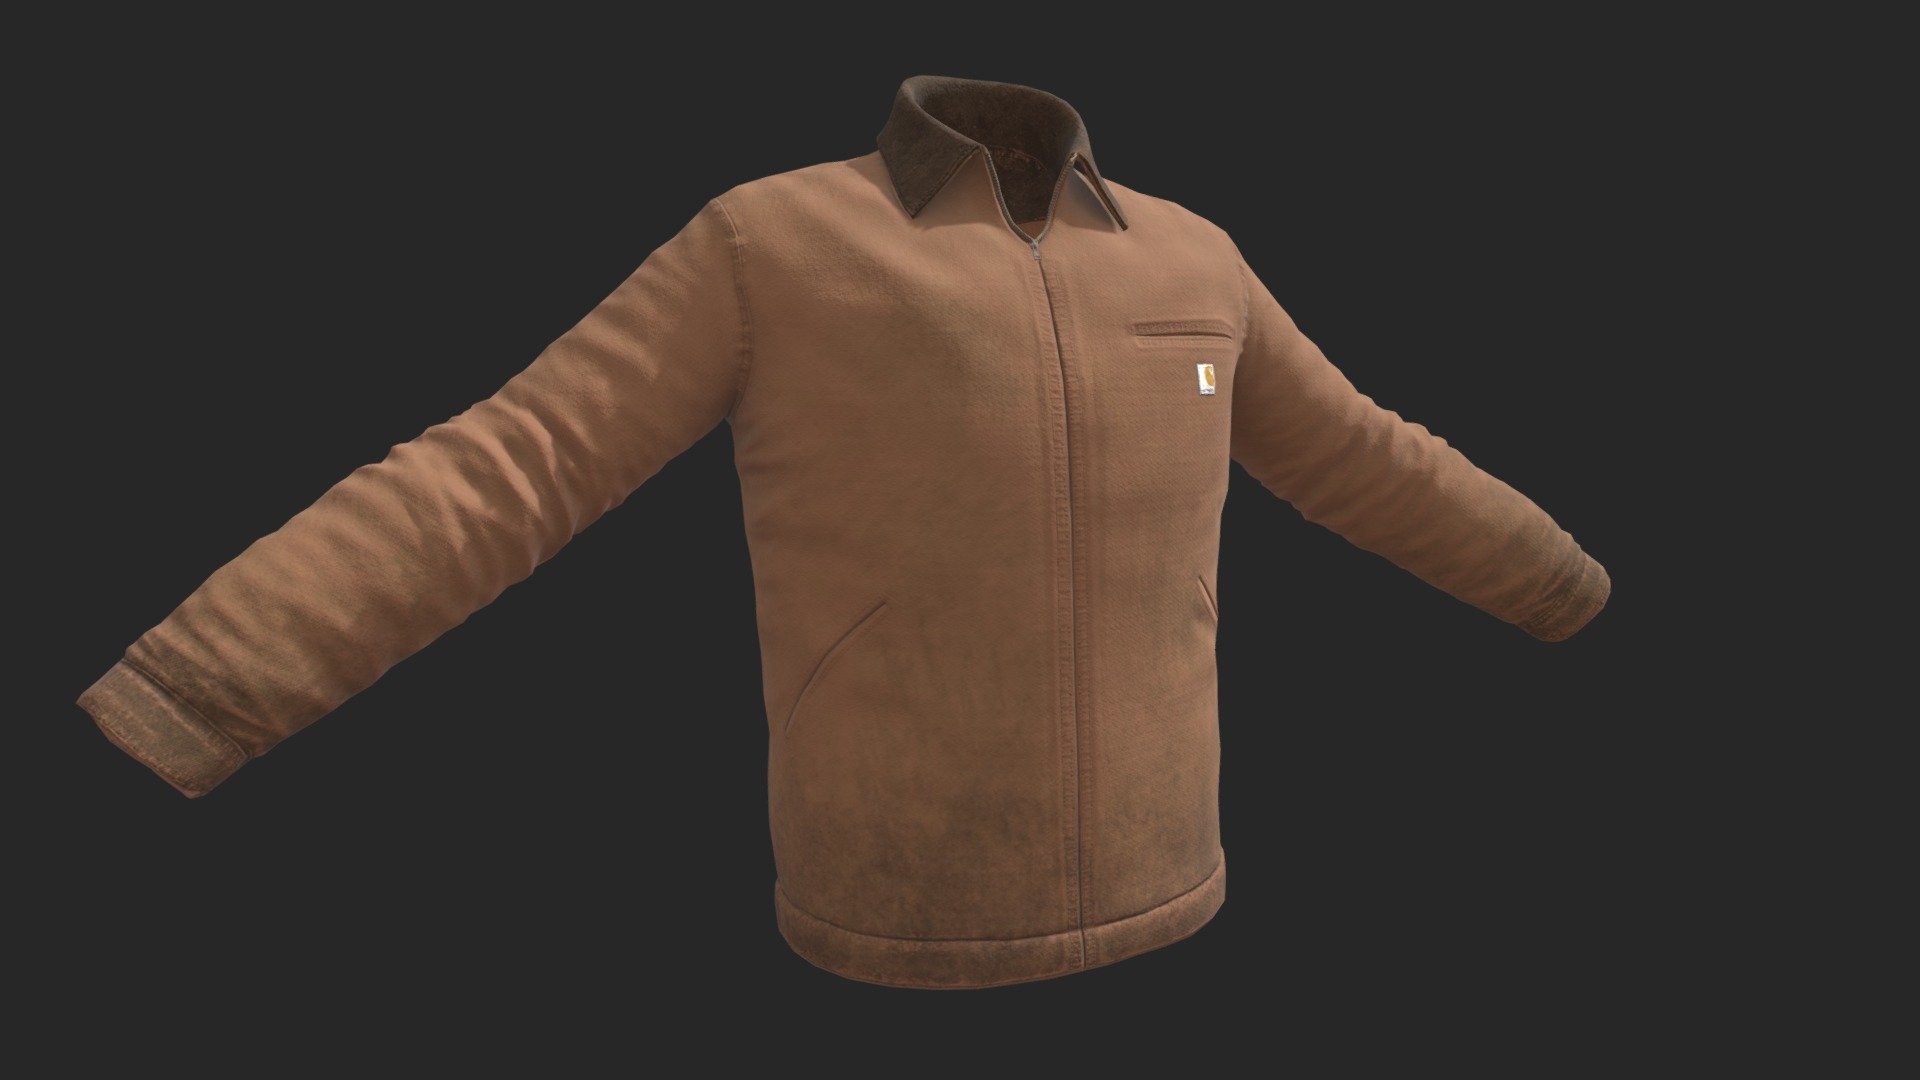 Carhartt Detroit Jacket modeled in Maya, sculpted in ZBrush, and textured in Substance Painter 3d model